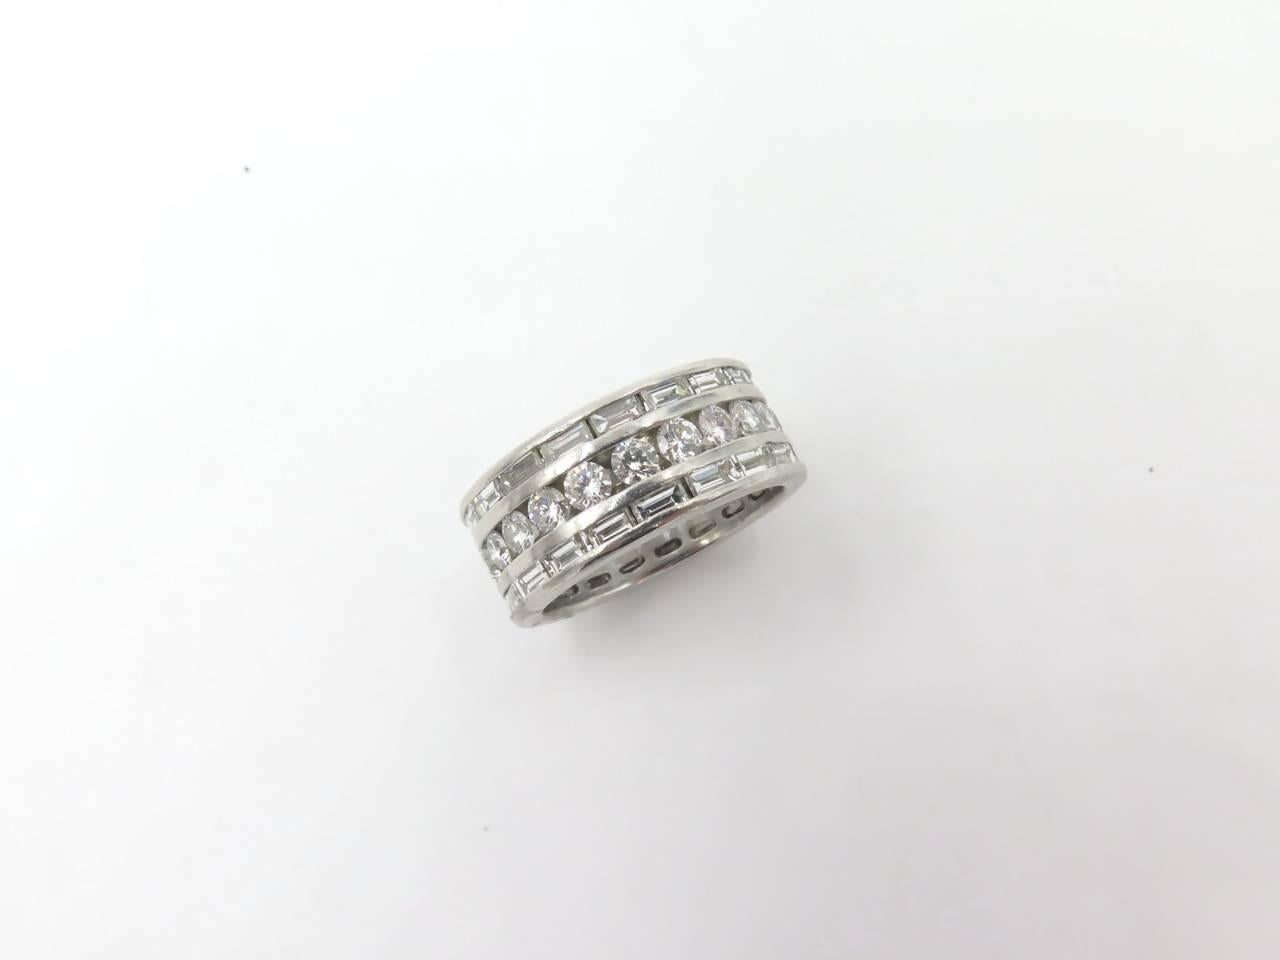 A platinum and diamond triple row band. Cenering a row of circlar cut diamonds, flanked by a row of baguette cut diamonds. Twenty two (2) circular and thirty six baguette weigh approximately 3.00 carats total. Approximately size 6. Gross weight is